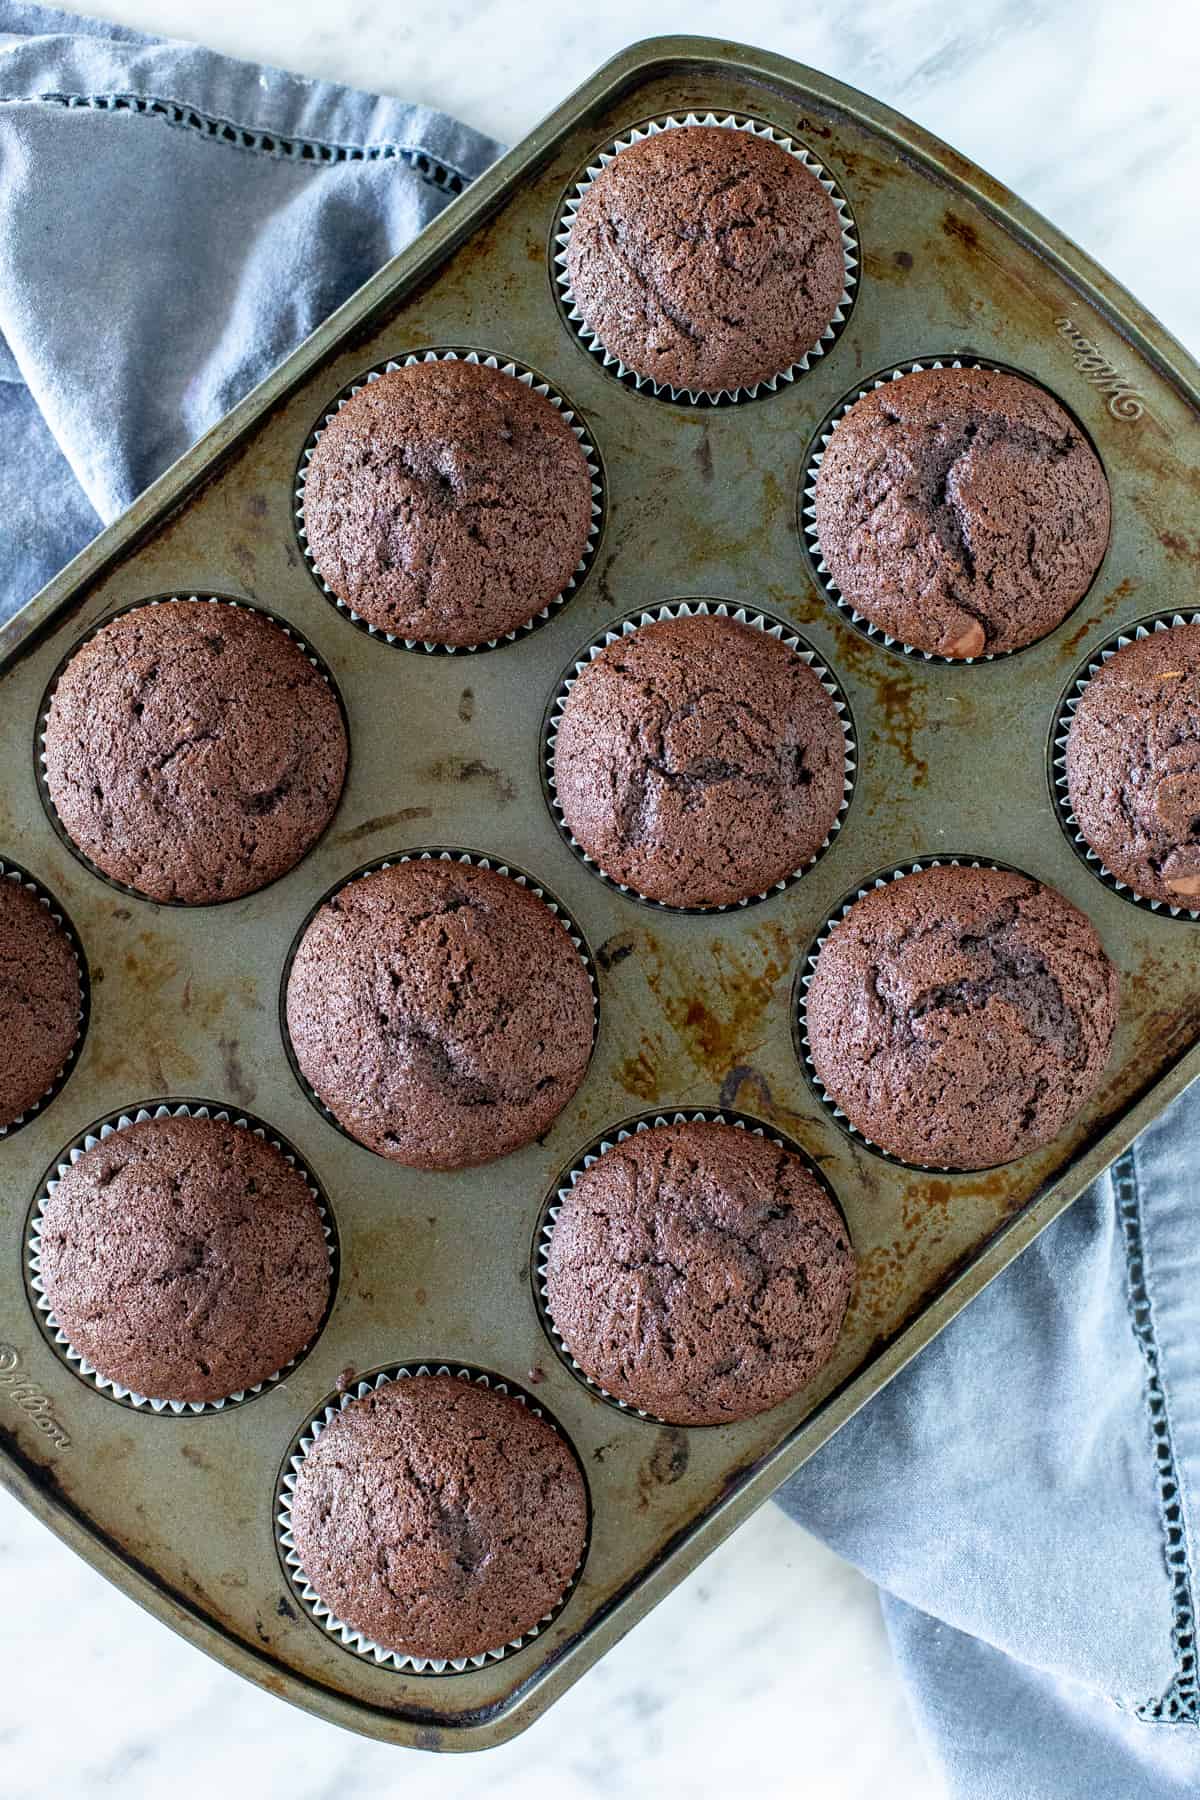 Pan of 12 chocolate muffins